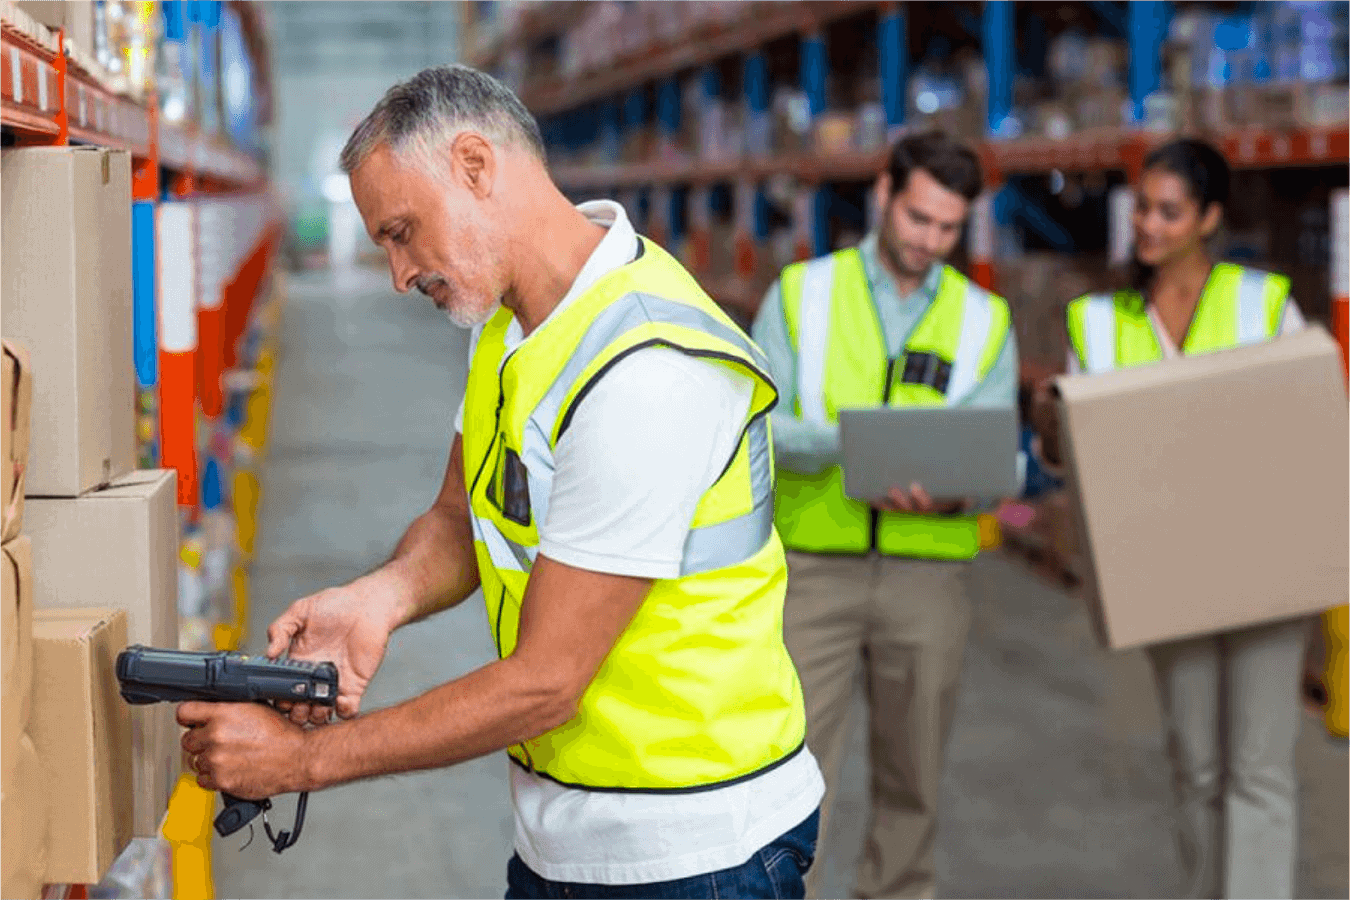 Streamline processes, increase inventory visibility and accuracy